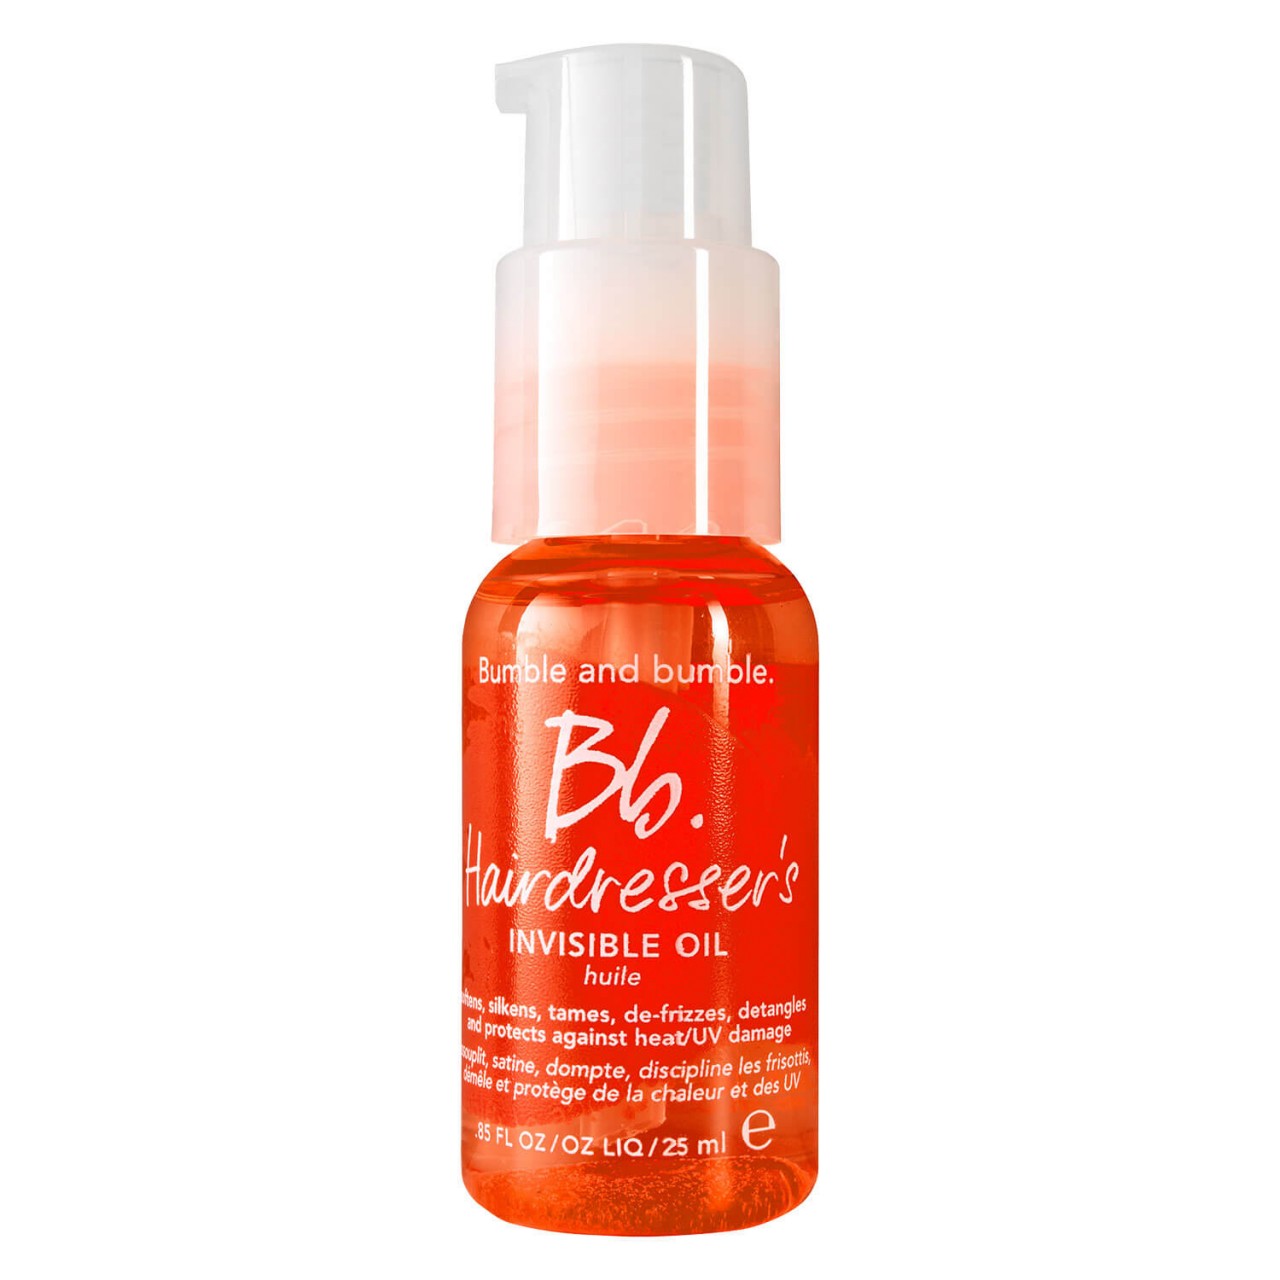 Bb. Hairdresser's Invisible Oil - Oil von Bumble and bumble.